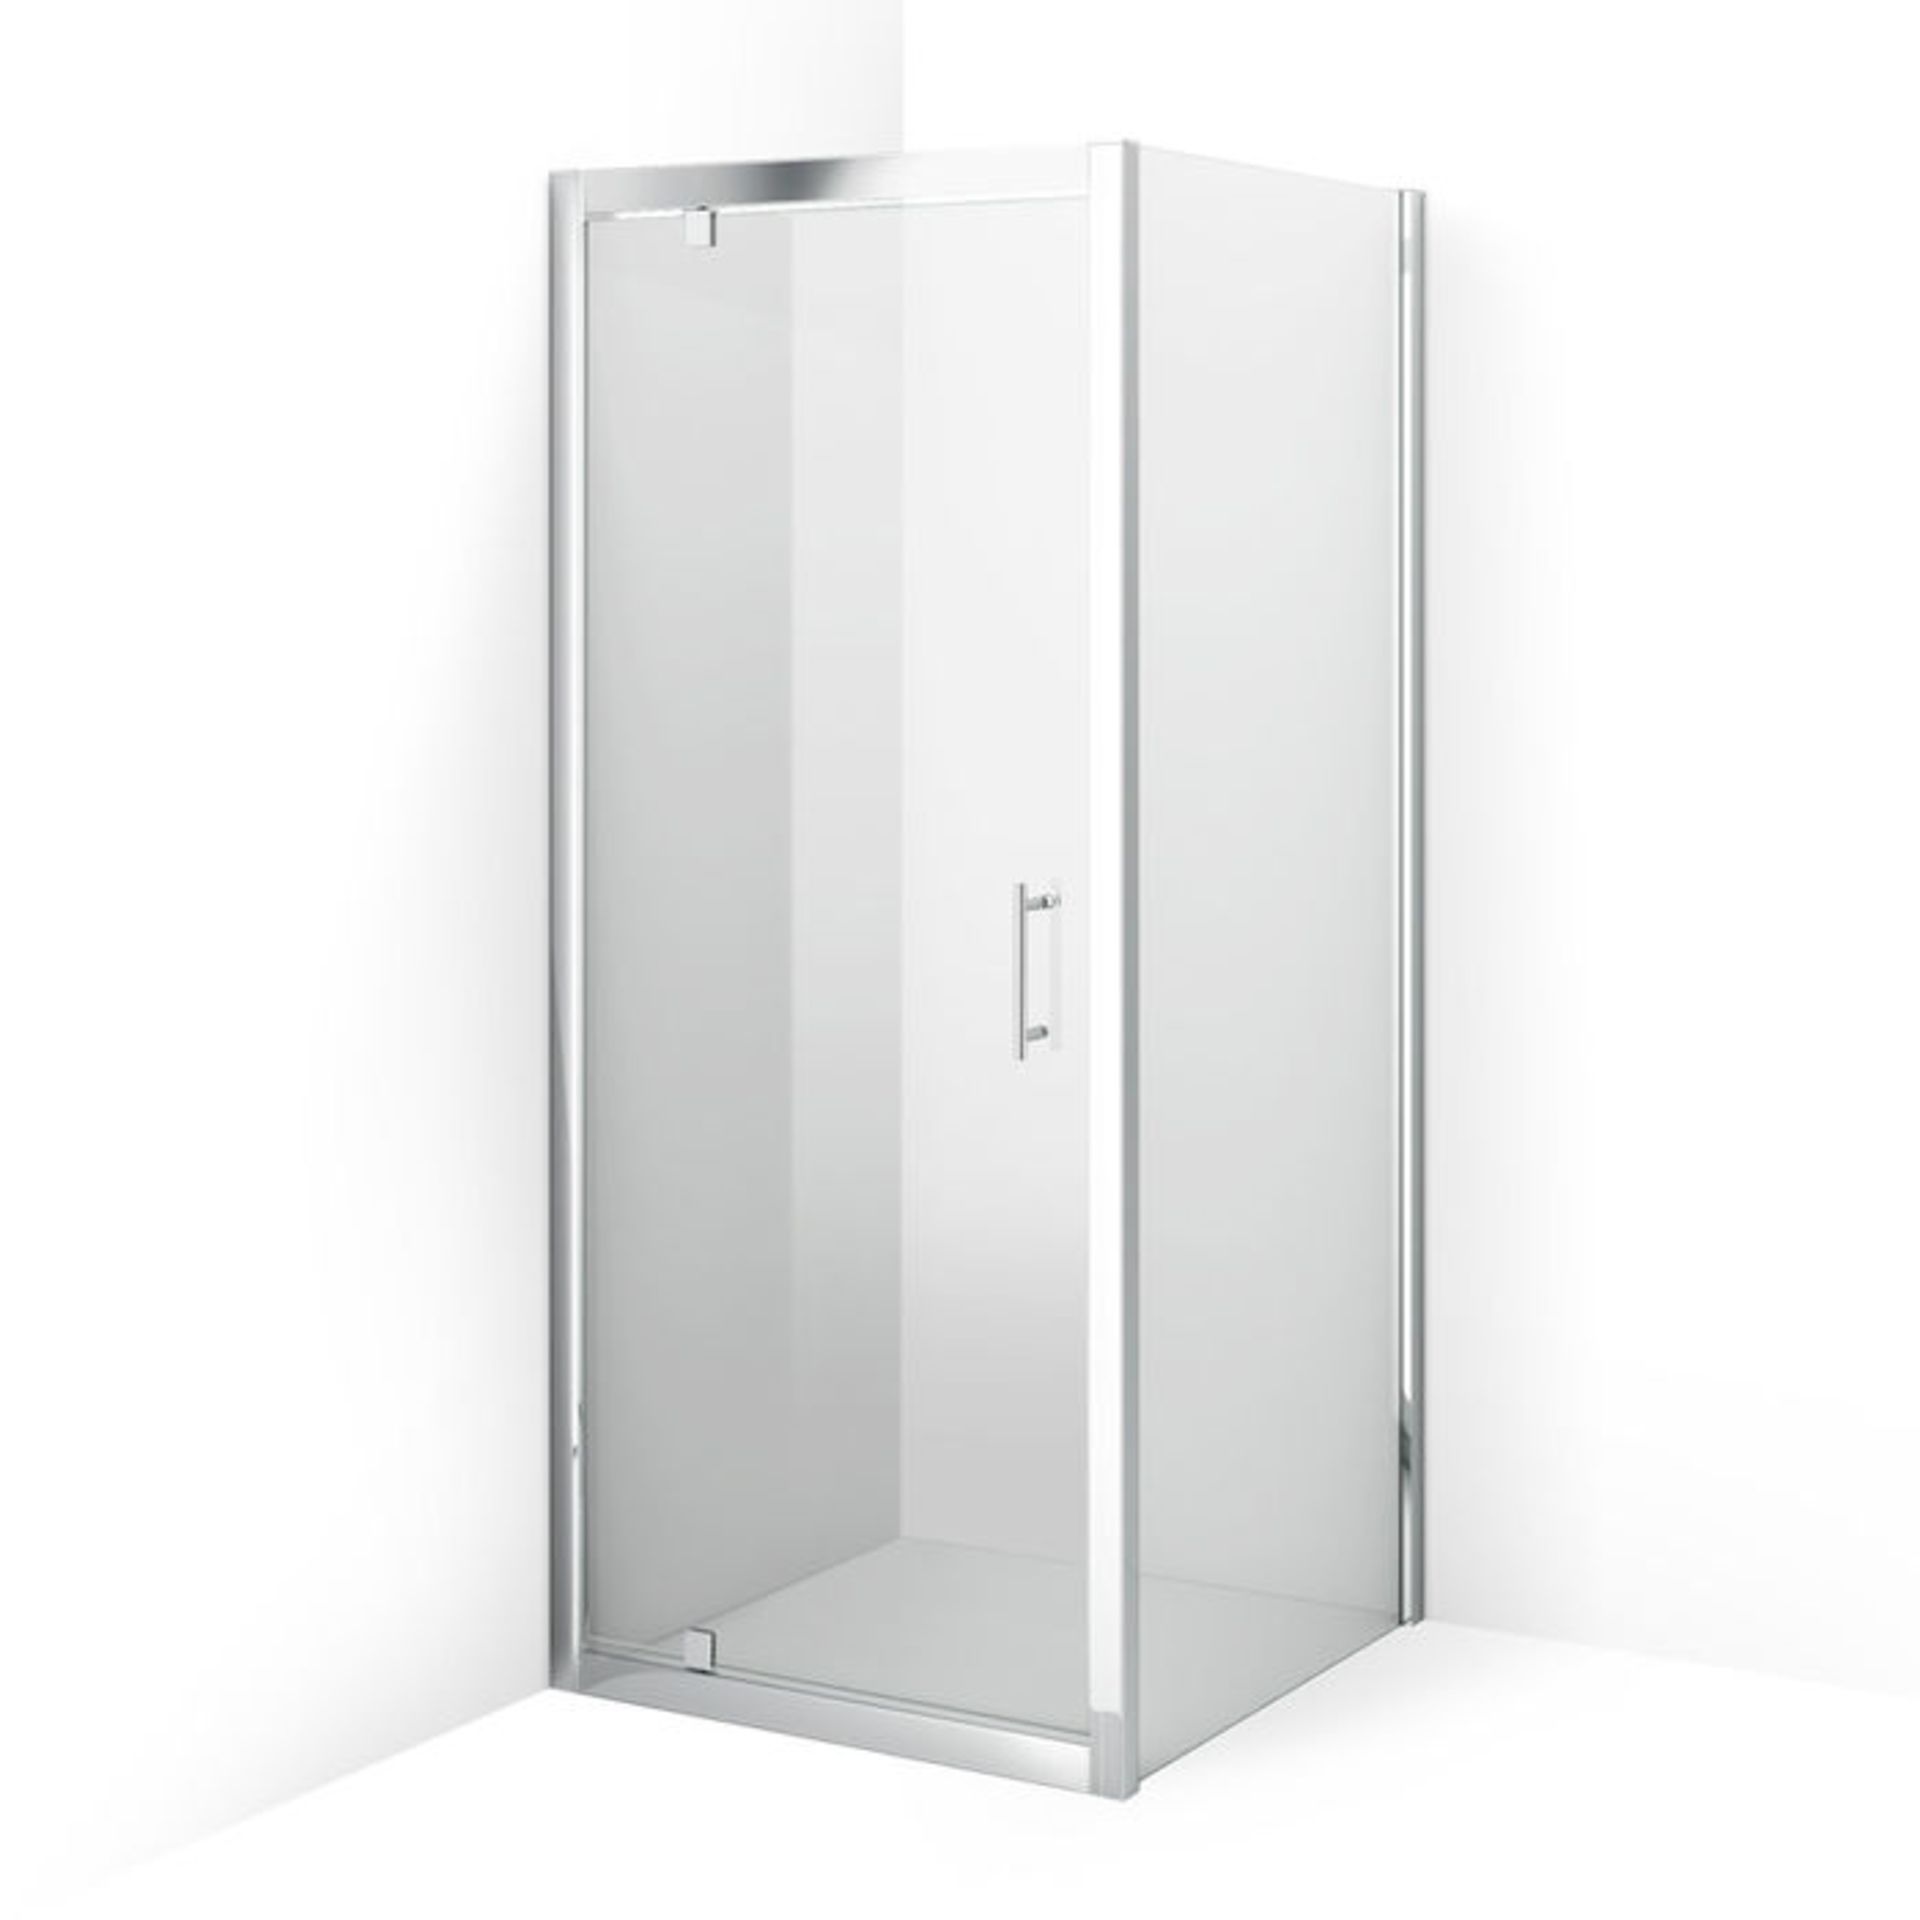 (CS80) 760x760mm - 6mm - Elements Pivot Door Shower Enclosure. RRP £299.99. 6mm Safety Glass Fully - Image 4 of 4